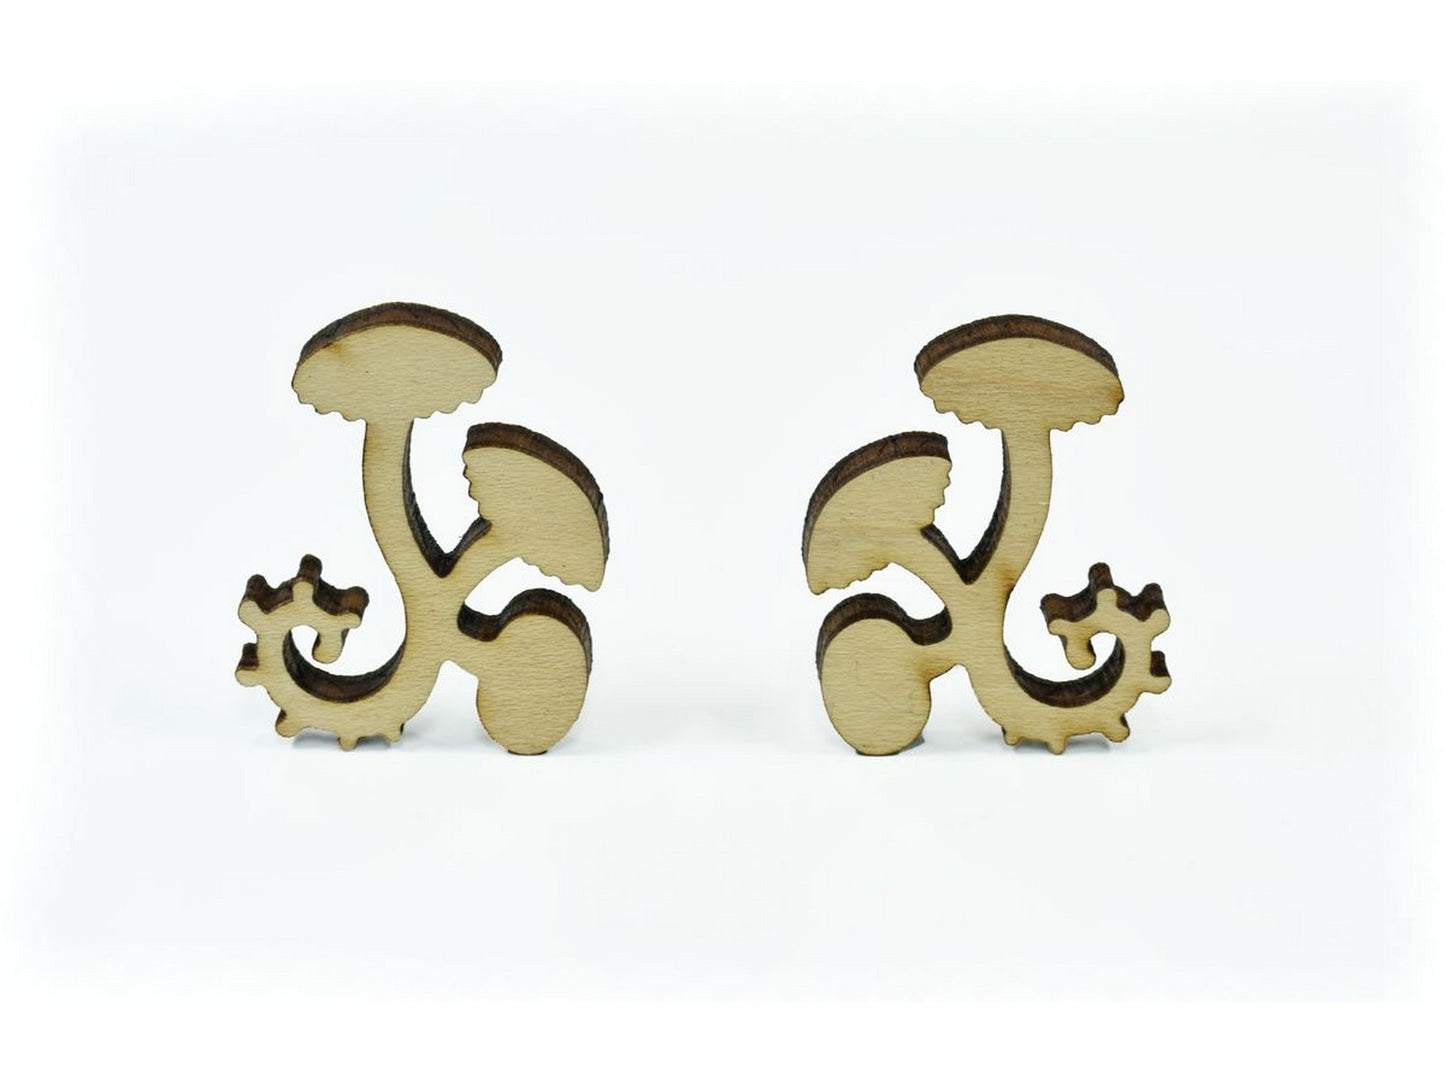 A closeup of pieces in the shape of mushrooms.